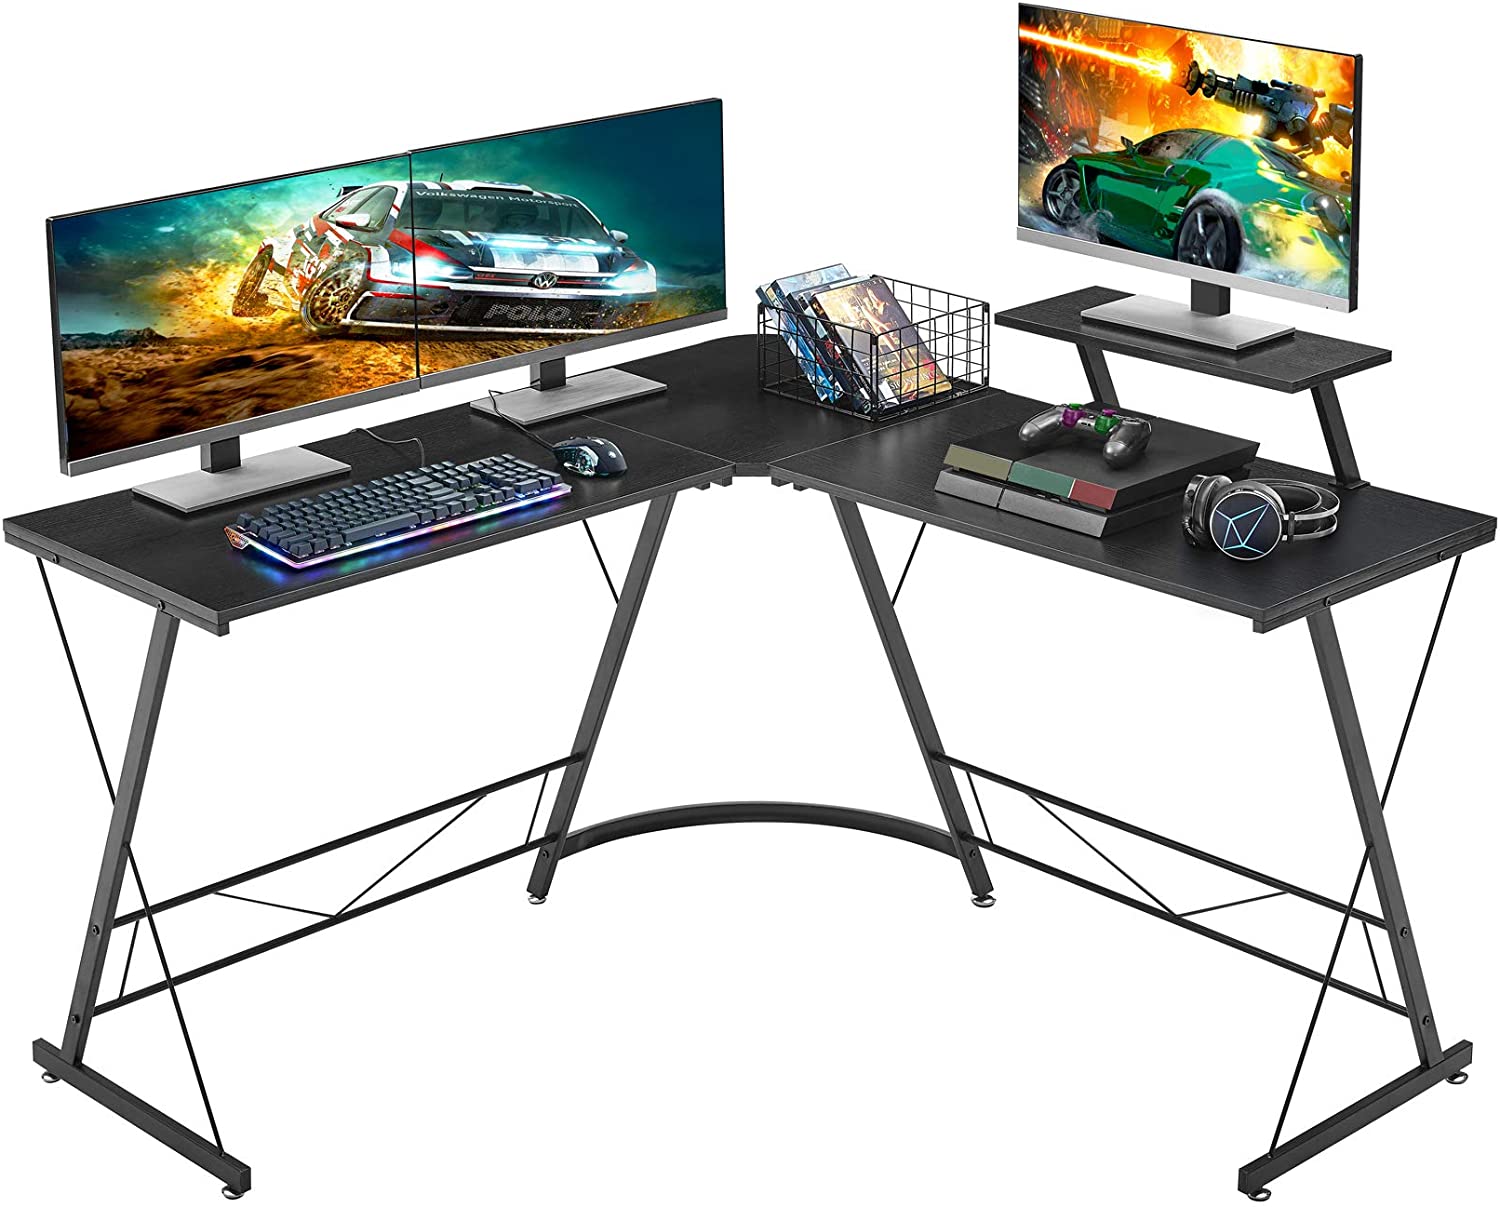 Detailing The Best Corner Desk For, Why Are Gaming Desks So Expensive